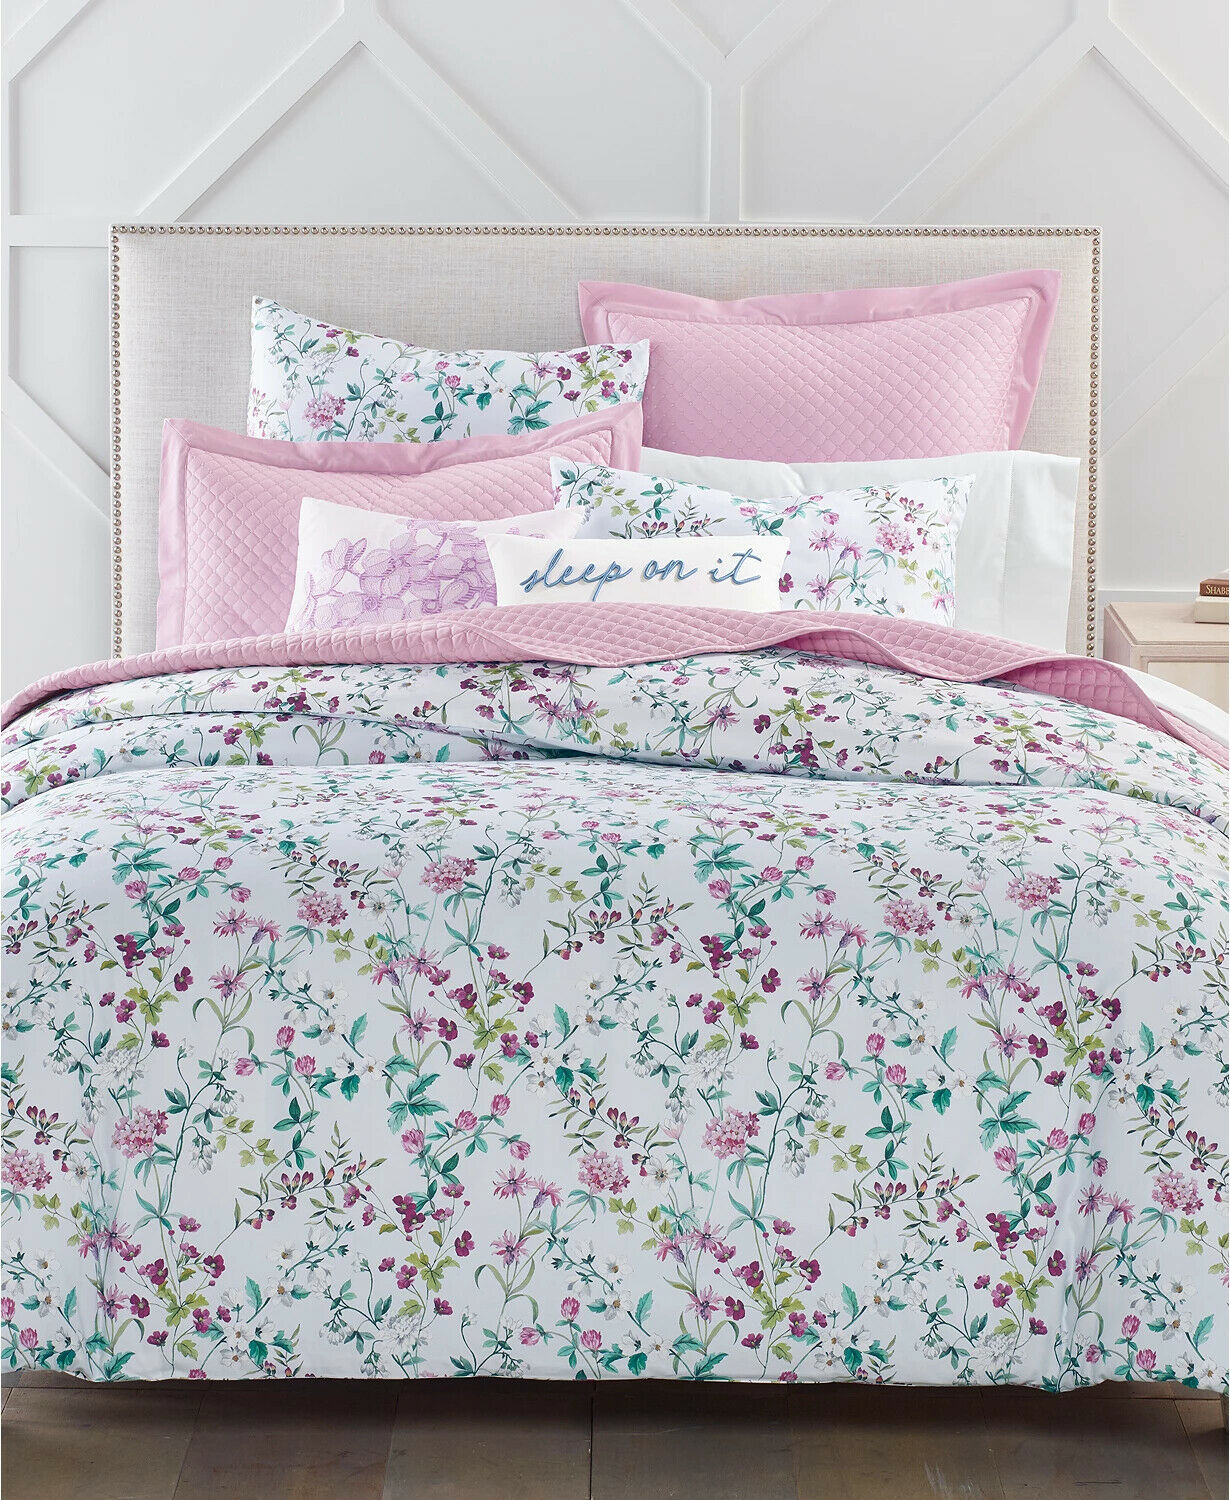 Primary image for Charter Club Damask Designs 300-Thread Count Sateen Floral Vines Standard Sham